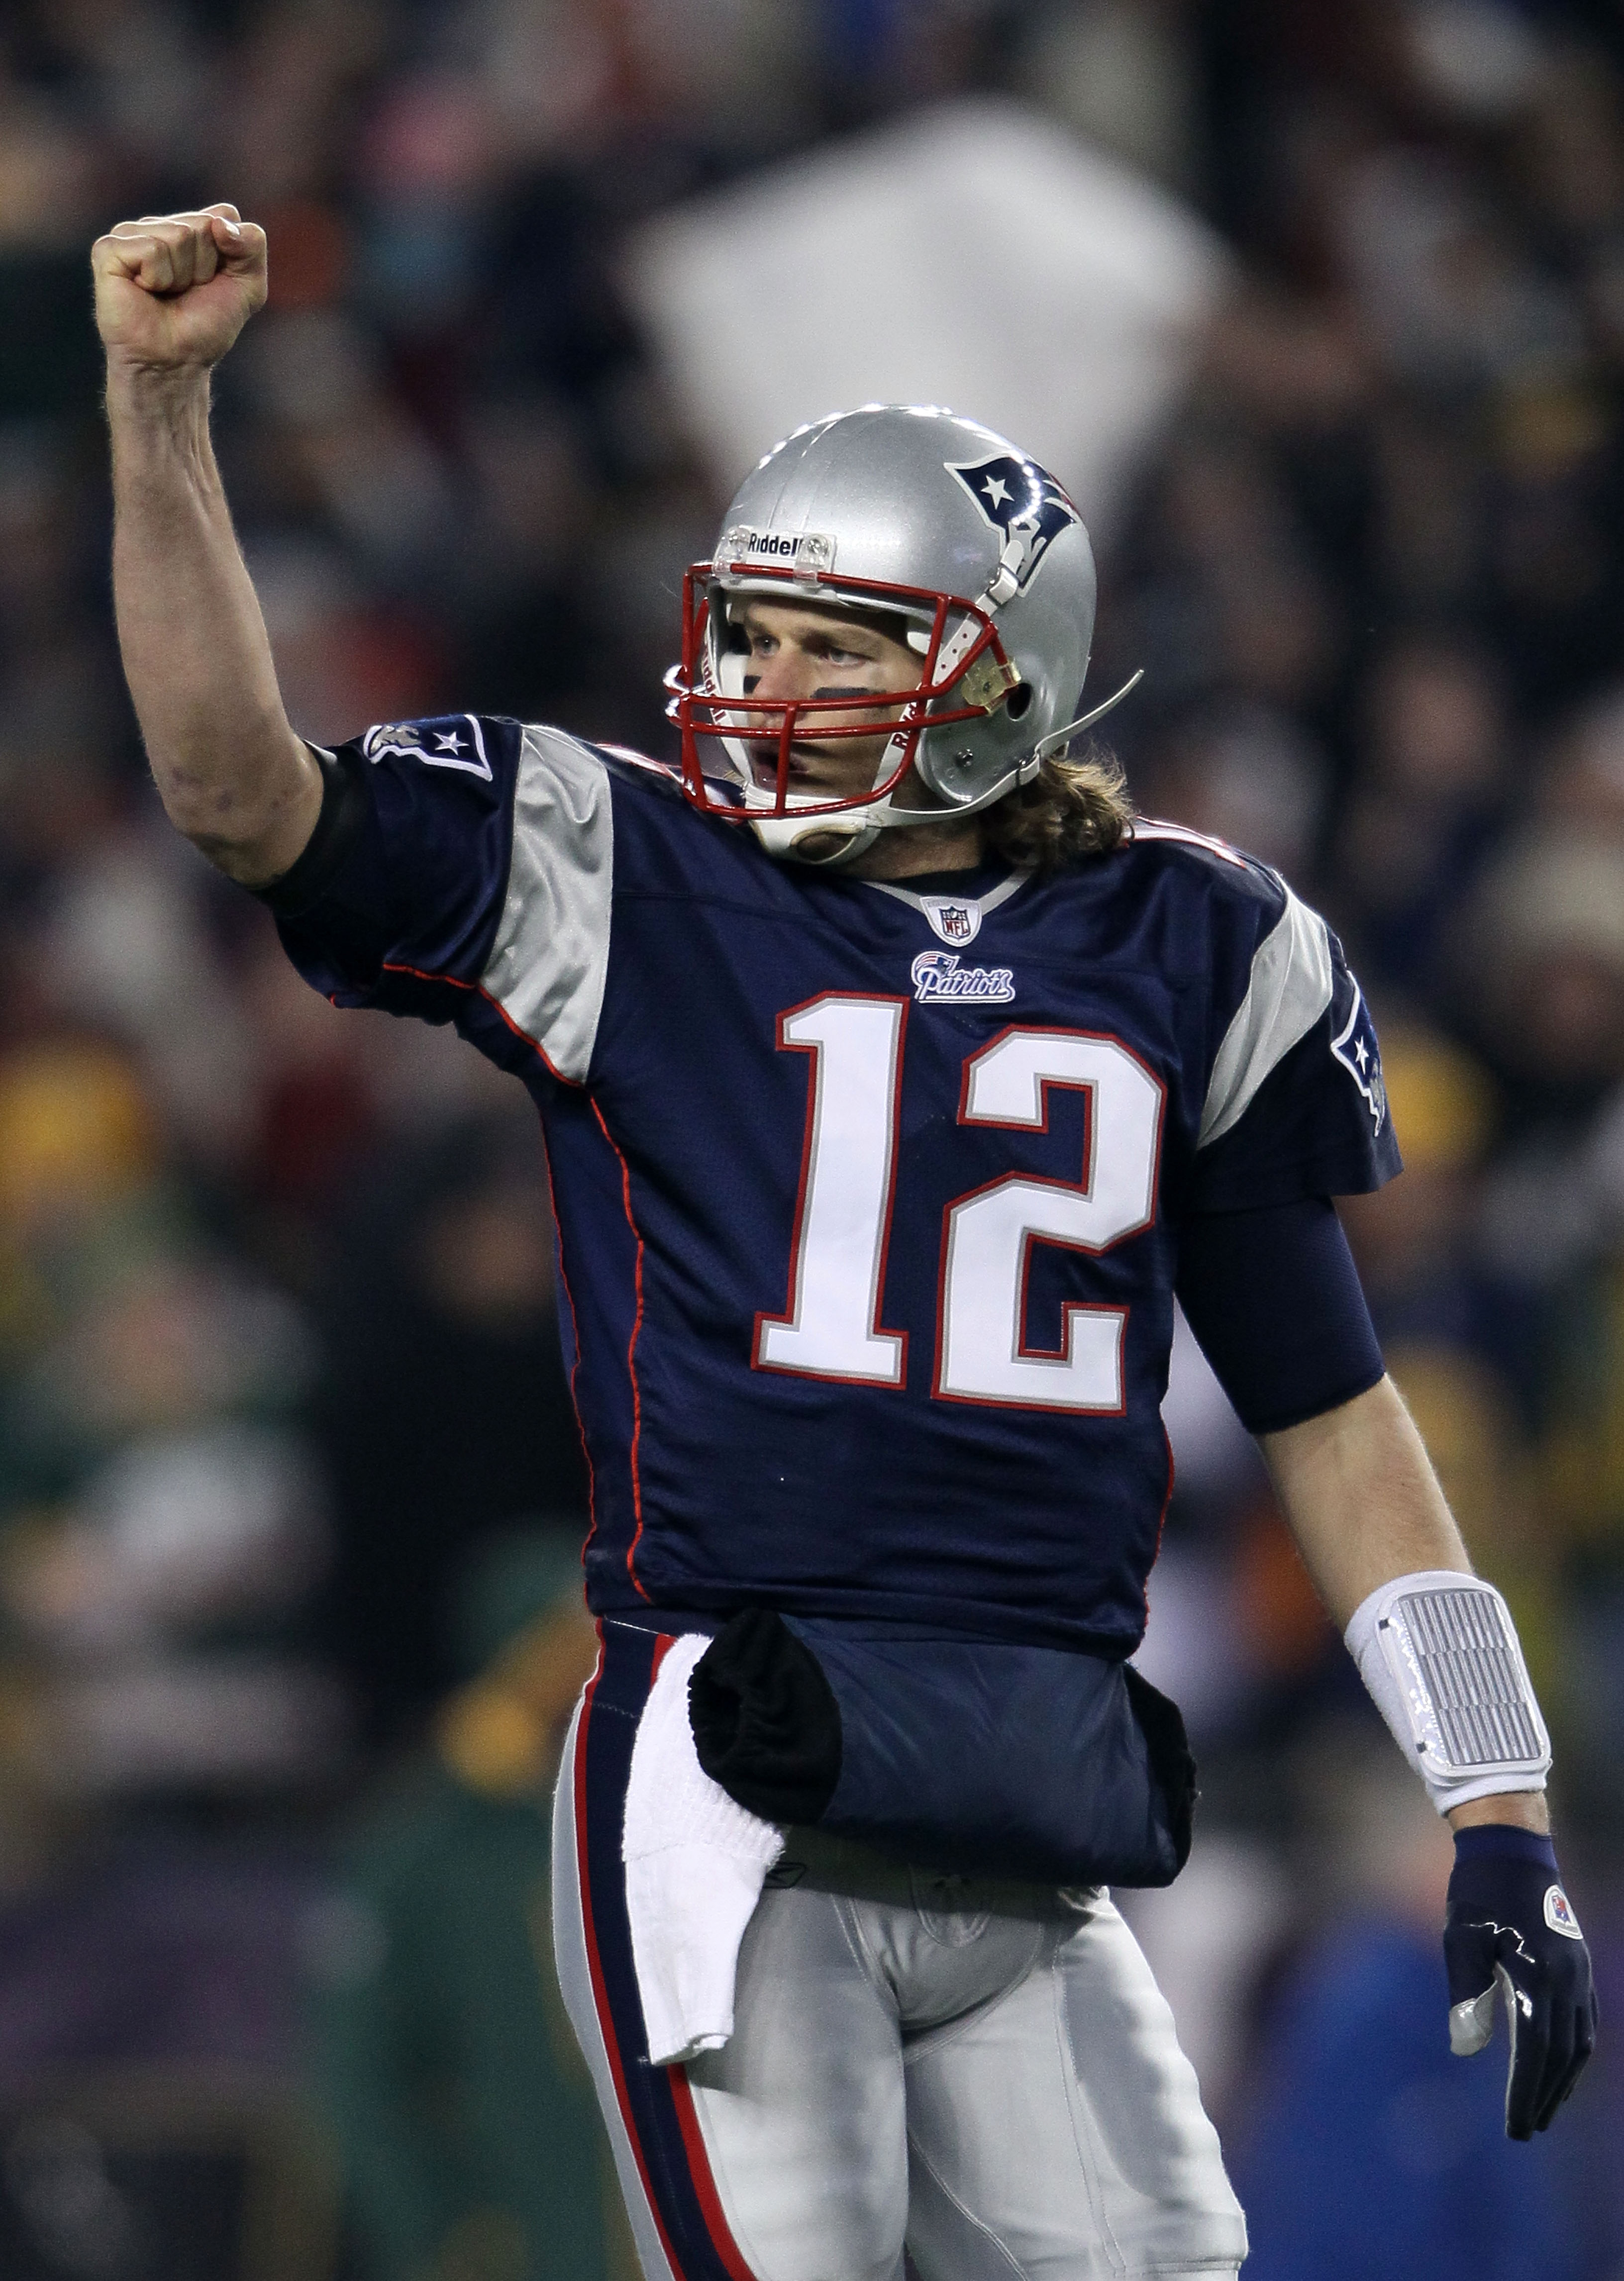 FOXBORO, MA - DECEMBER 19:  Quarterback Tom Brady #12 of the New England Patriots celebrates a touchdown scored by running back BenJarvus Green-Ellis #42 (not pictured) against the Green Bay Packers in the first quarter of the game at Gillette Stadium on